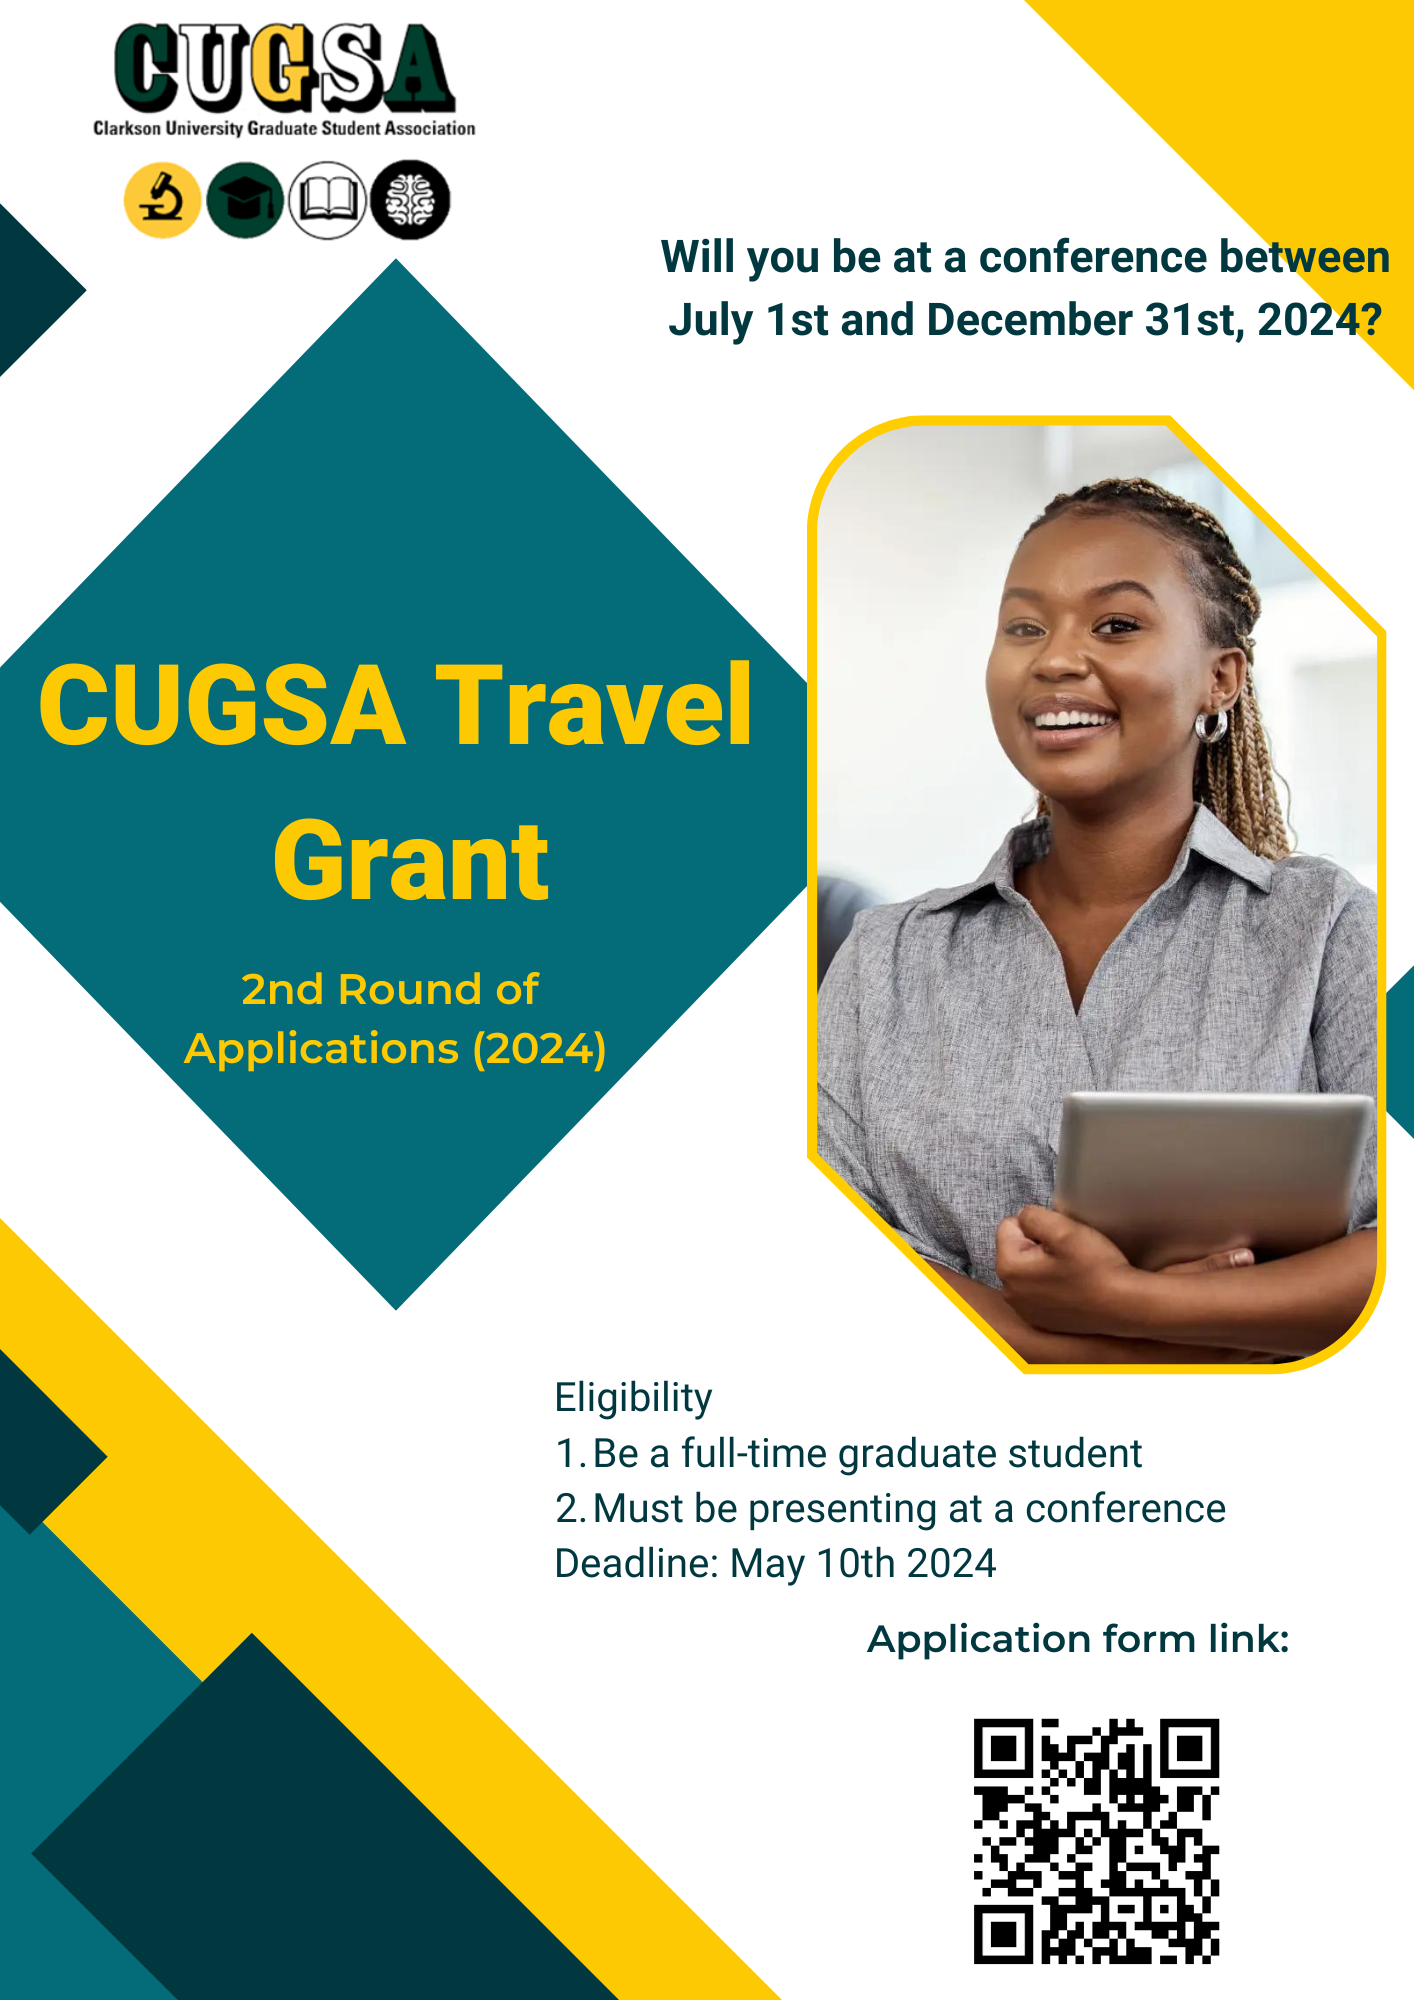 The poster is visually structured with a clear and bold design, primarily using the colors green, yellow, and white. It prominently features the text "CUGSA Travel Grant" at the top, indicating the main subject of the poster. This is part of the "2nd Round of Applications (2024)" for a grant offered by the Clarkson University Graduate Student Association (CUGSA). On the right side of the poster, there is a photo of a smiling young Black woman with her hair in braids, wearing a light grey button-down shirt. She appears professional and cheerful, possibly representing a satisfied grant recipient or a potential applicant. She is holding a tablet, suggesting her engagement with academic or professional work. Below this, the poster asks, "Will you be at a conference between July 1st and December 31st, 2024?" which sets the context for the travel grant's applicability. It lists eligibility criteria that include being a full-time graduate student and presenting at a conference. The deadline for application submission is specified as May 10th, 2024. The poster also includes a QR code at the bottom, intended for scanning to likely direct viewers to the application form or additional information online. Overall, the poster's design is aimed at attracting attention with its bright colors and clear typography, efficiently communicating essential details about the travel grant opportunity.